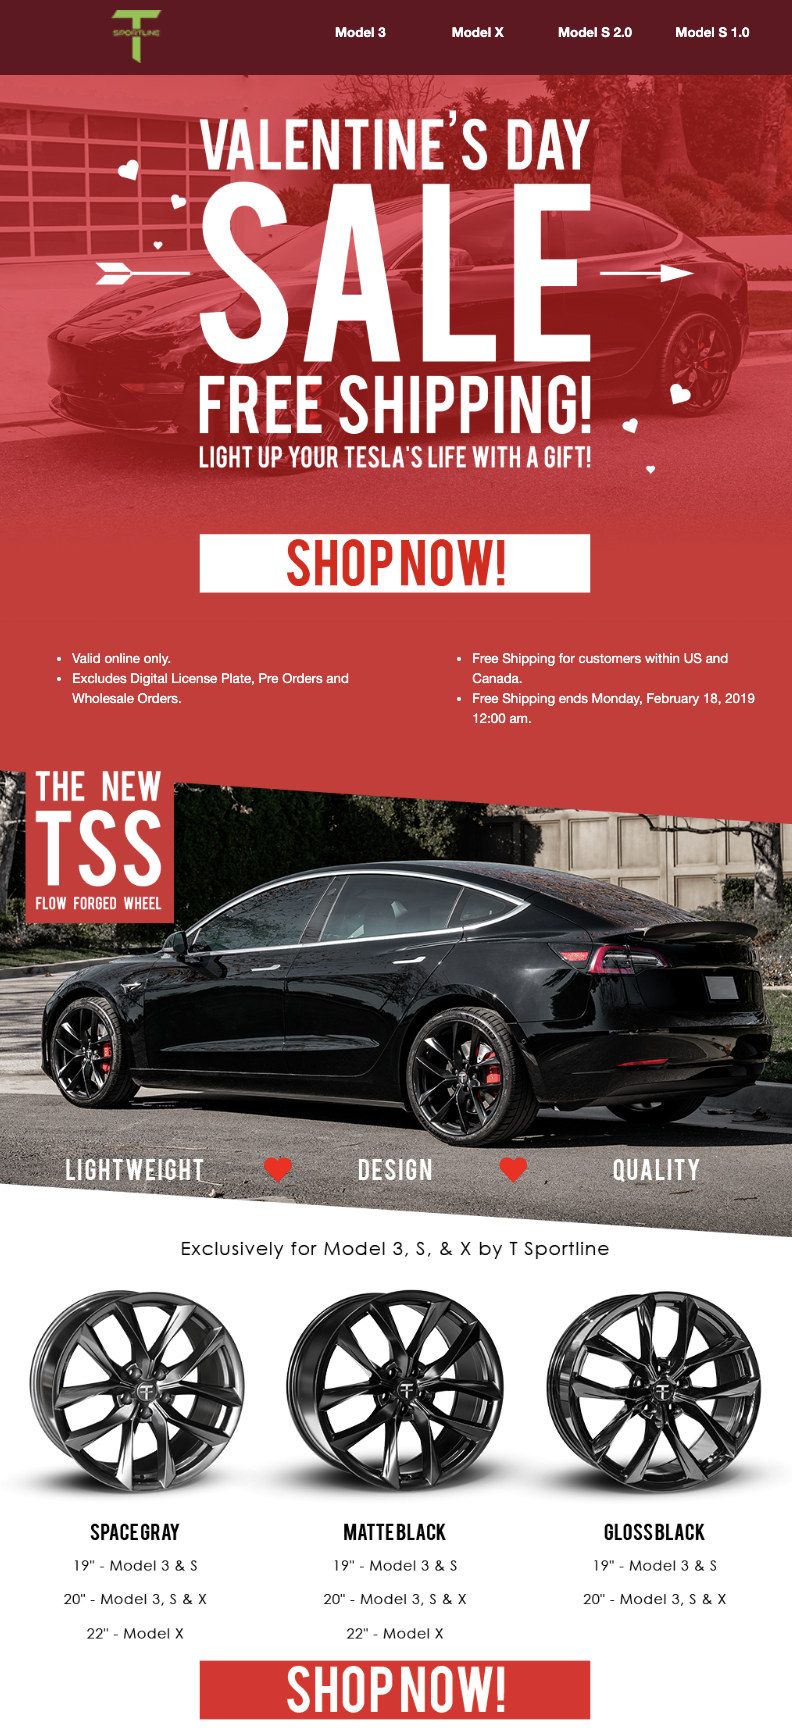 NEW MODEL Y 18 inch at Tsportline?!, Page 6